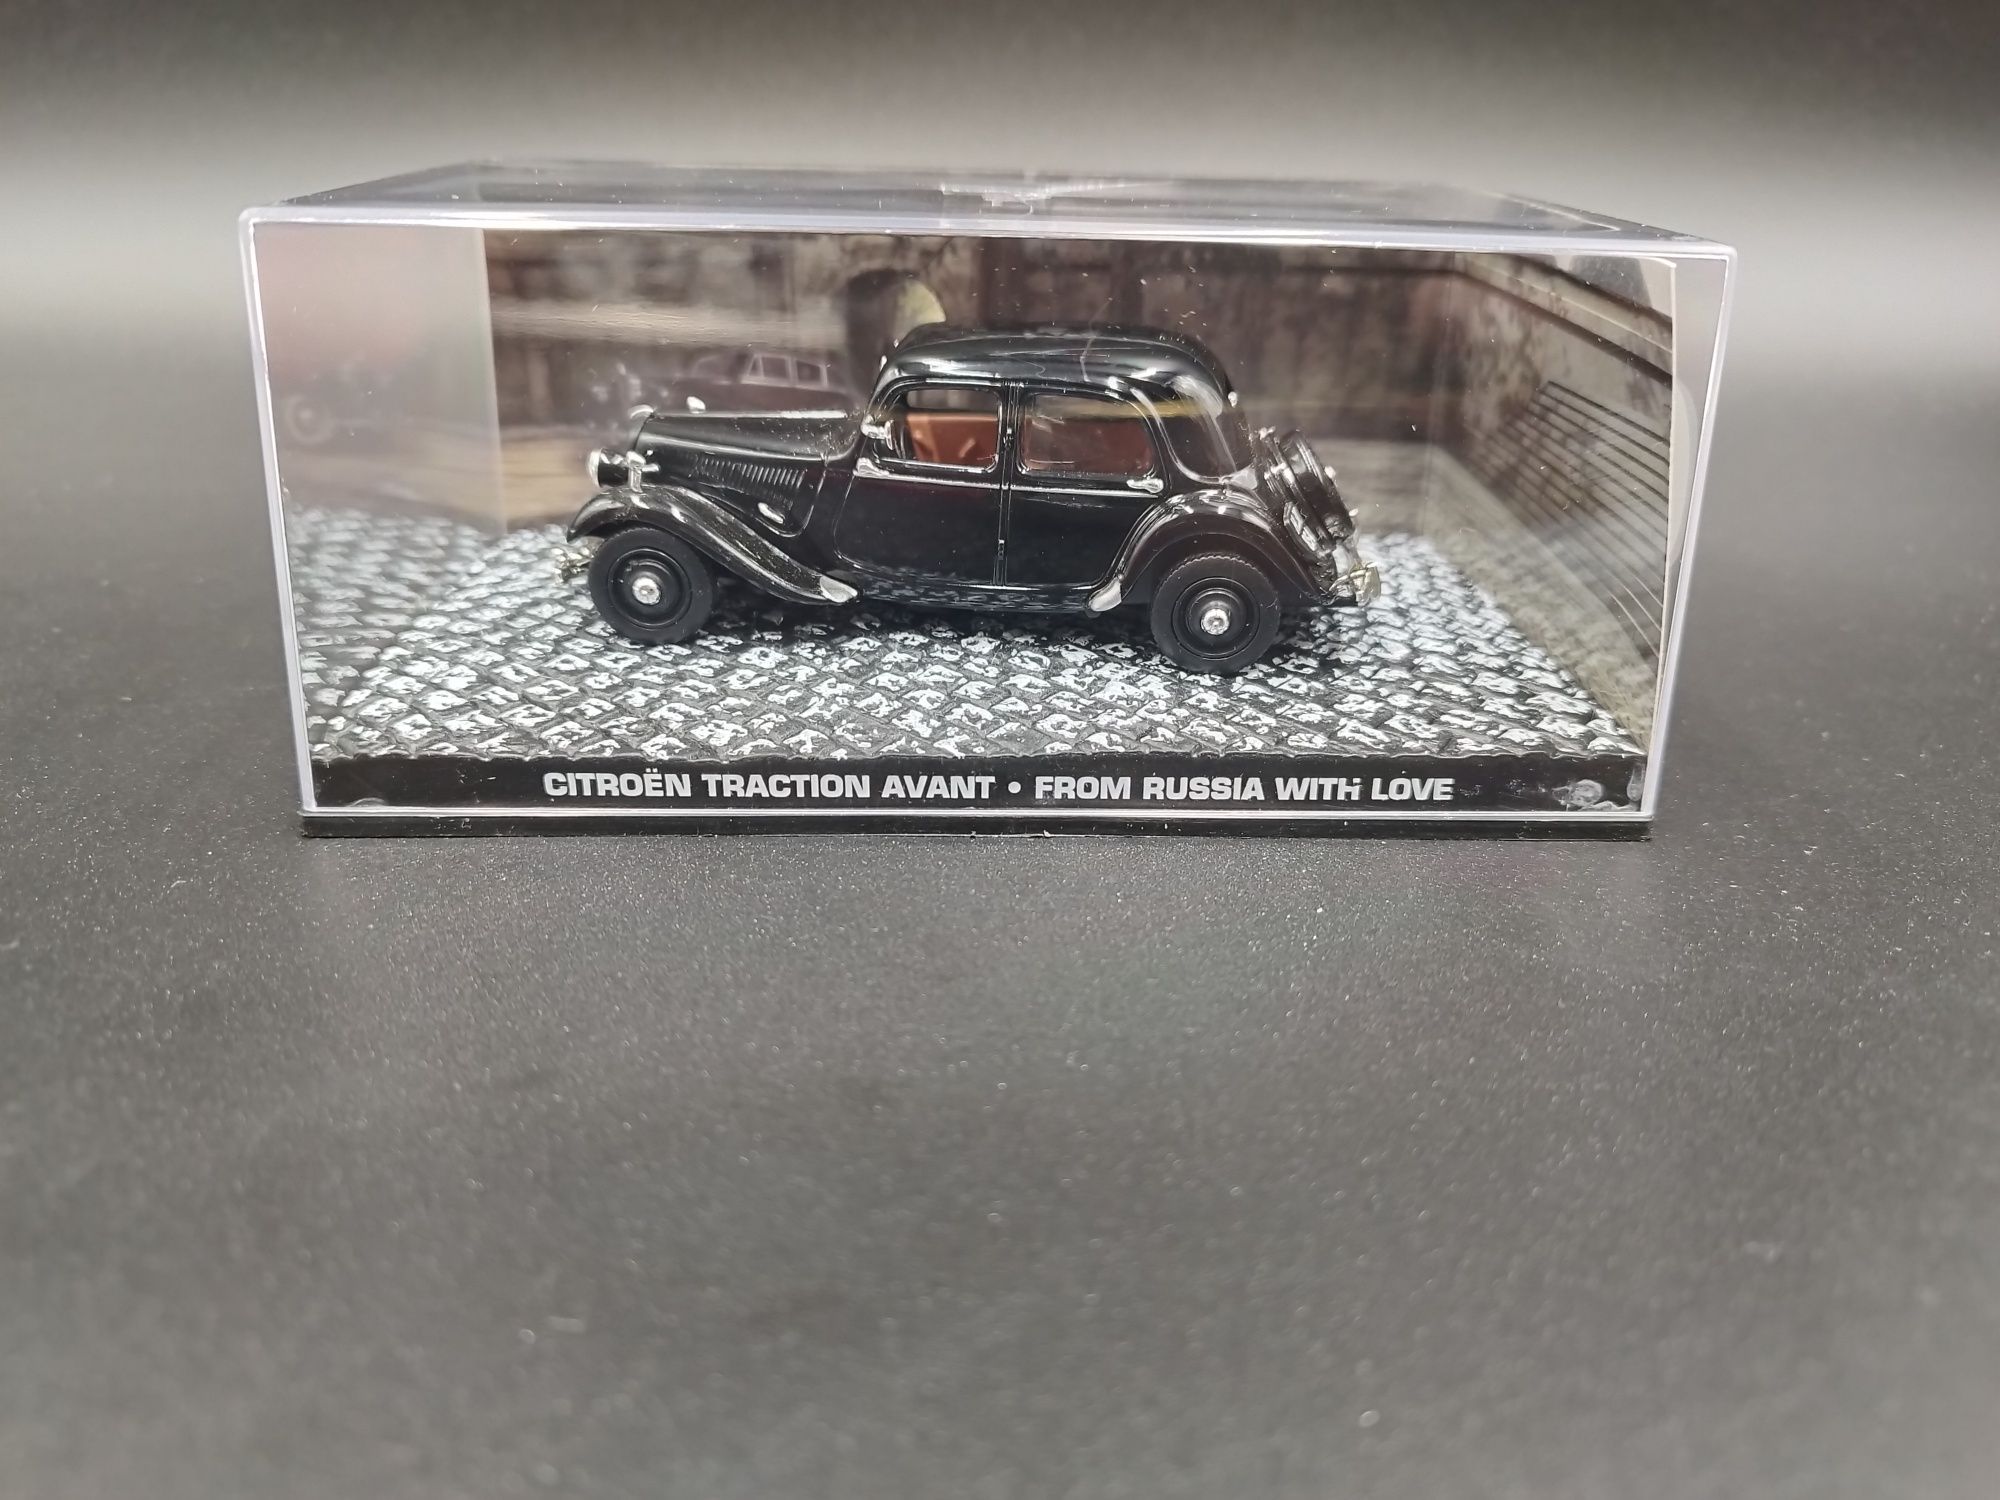 1:43 Citroen Traction Avant Bond 007 From Russia With Love model